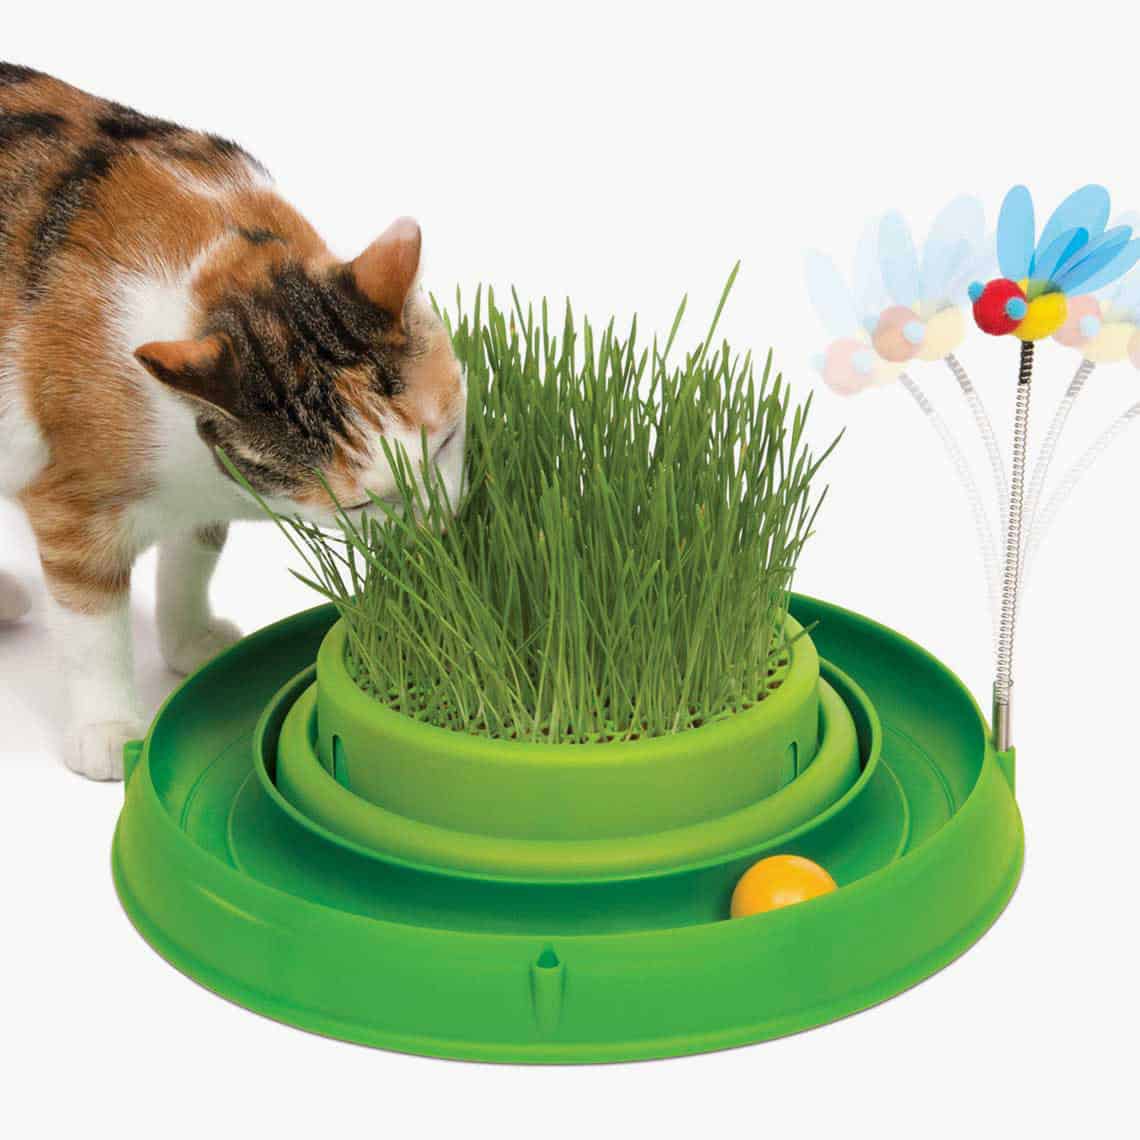 Circuit Ball Toy With Grass Planter 2